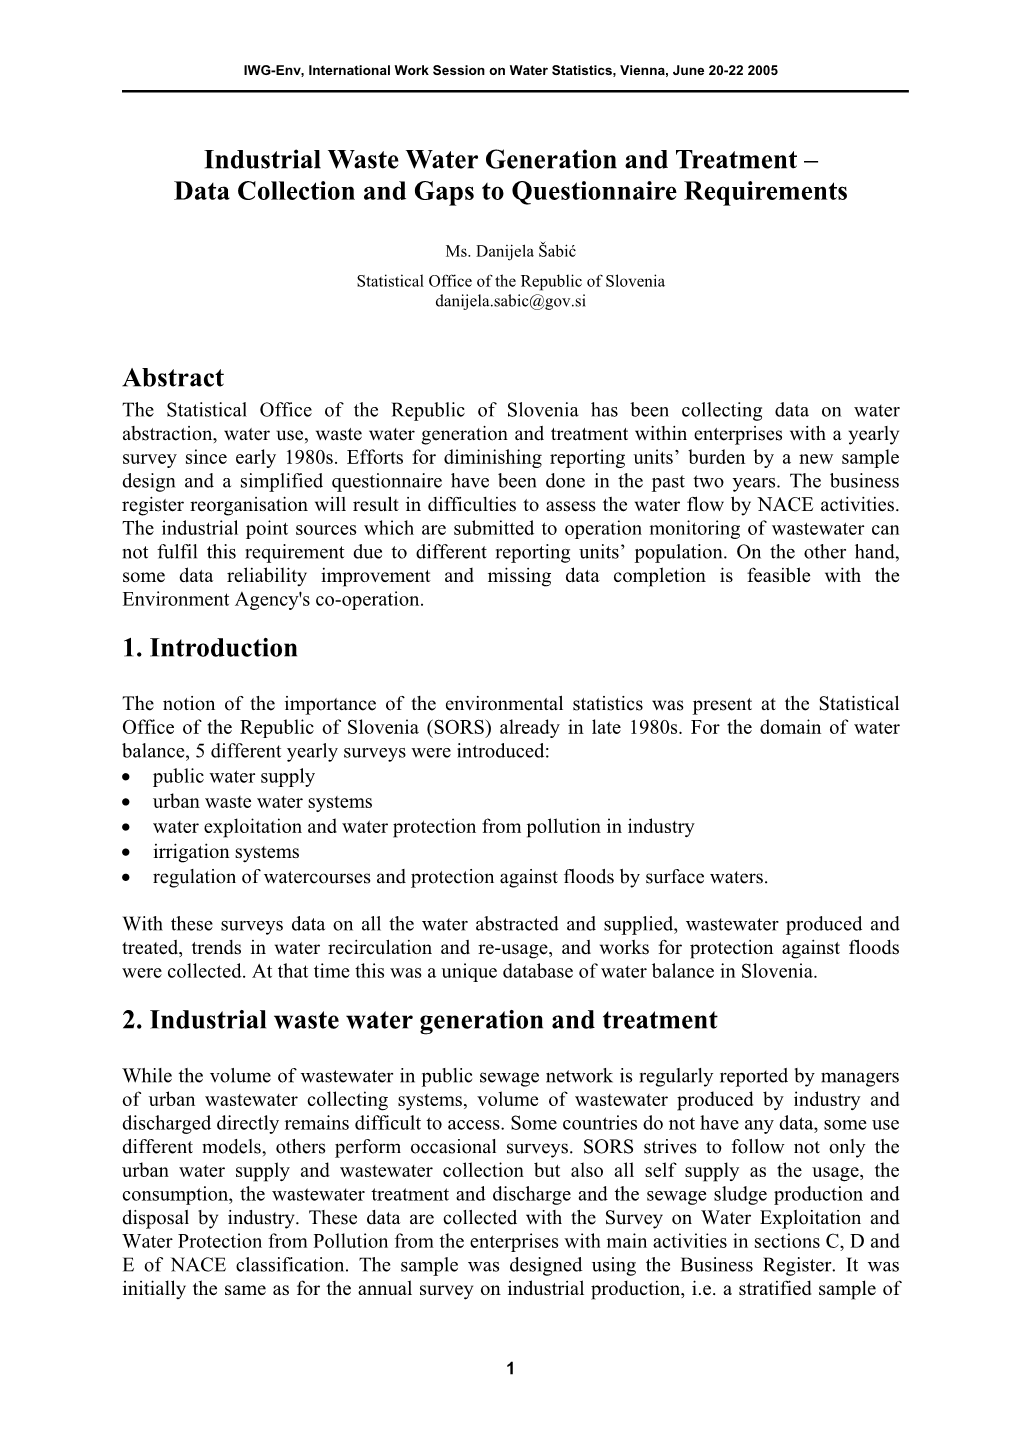 Industrial Waste Water Generation and Treatment – Data Collection and Gaps to Questionnaire Requirements